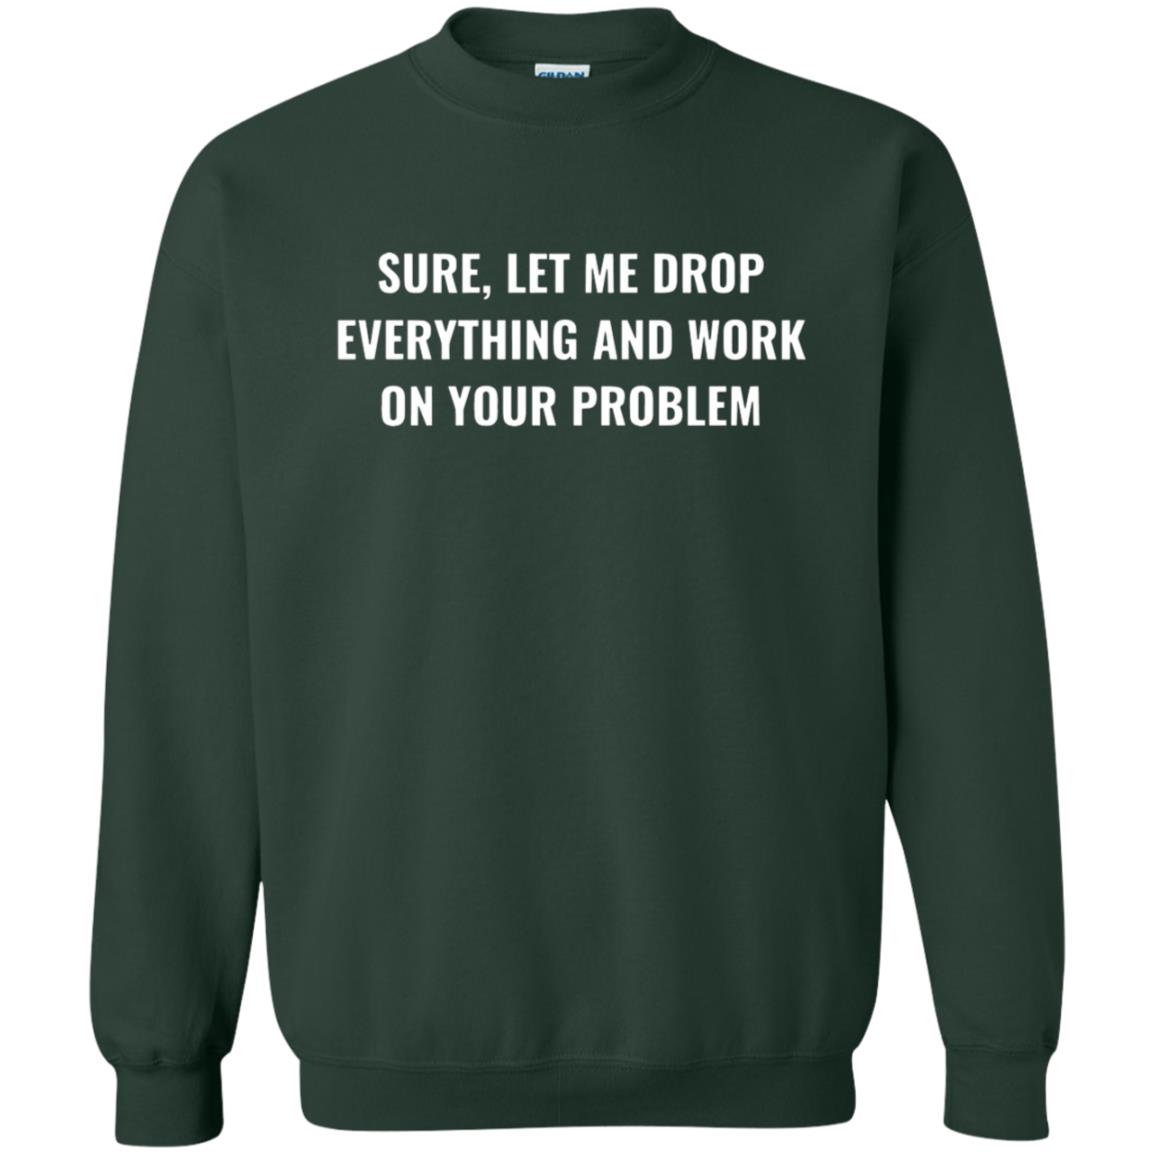 Let Me Drop Everything And Work On Your Problem Shirt - 10% Off ...